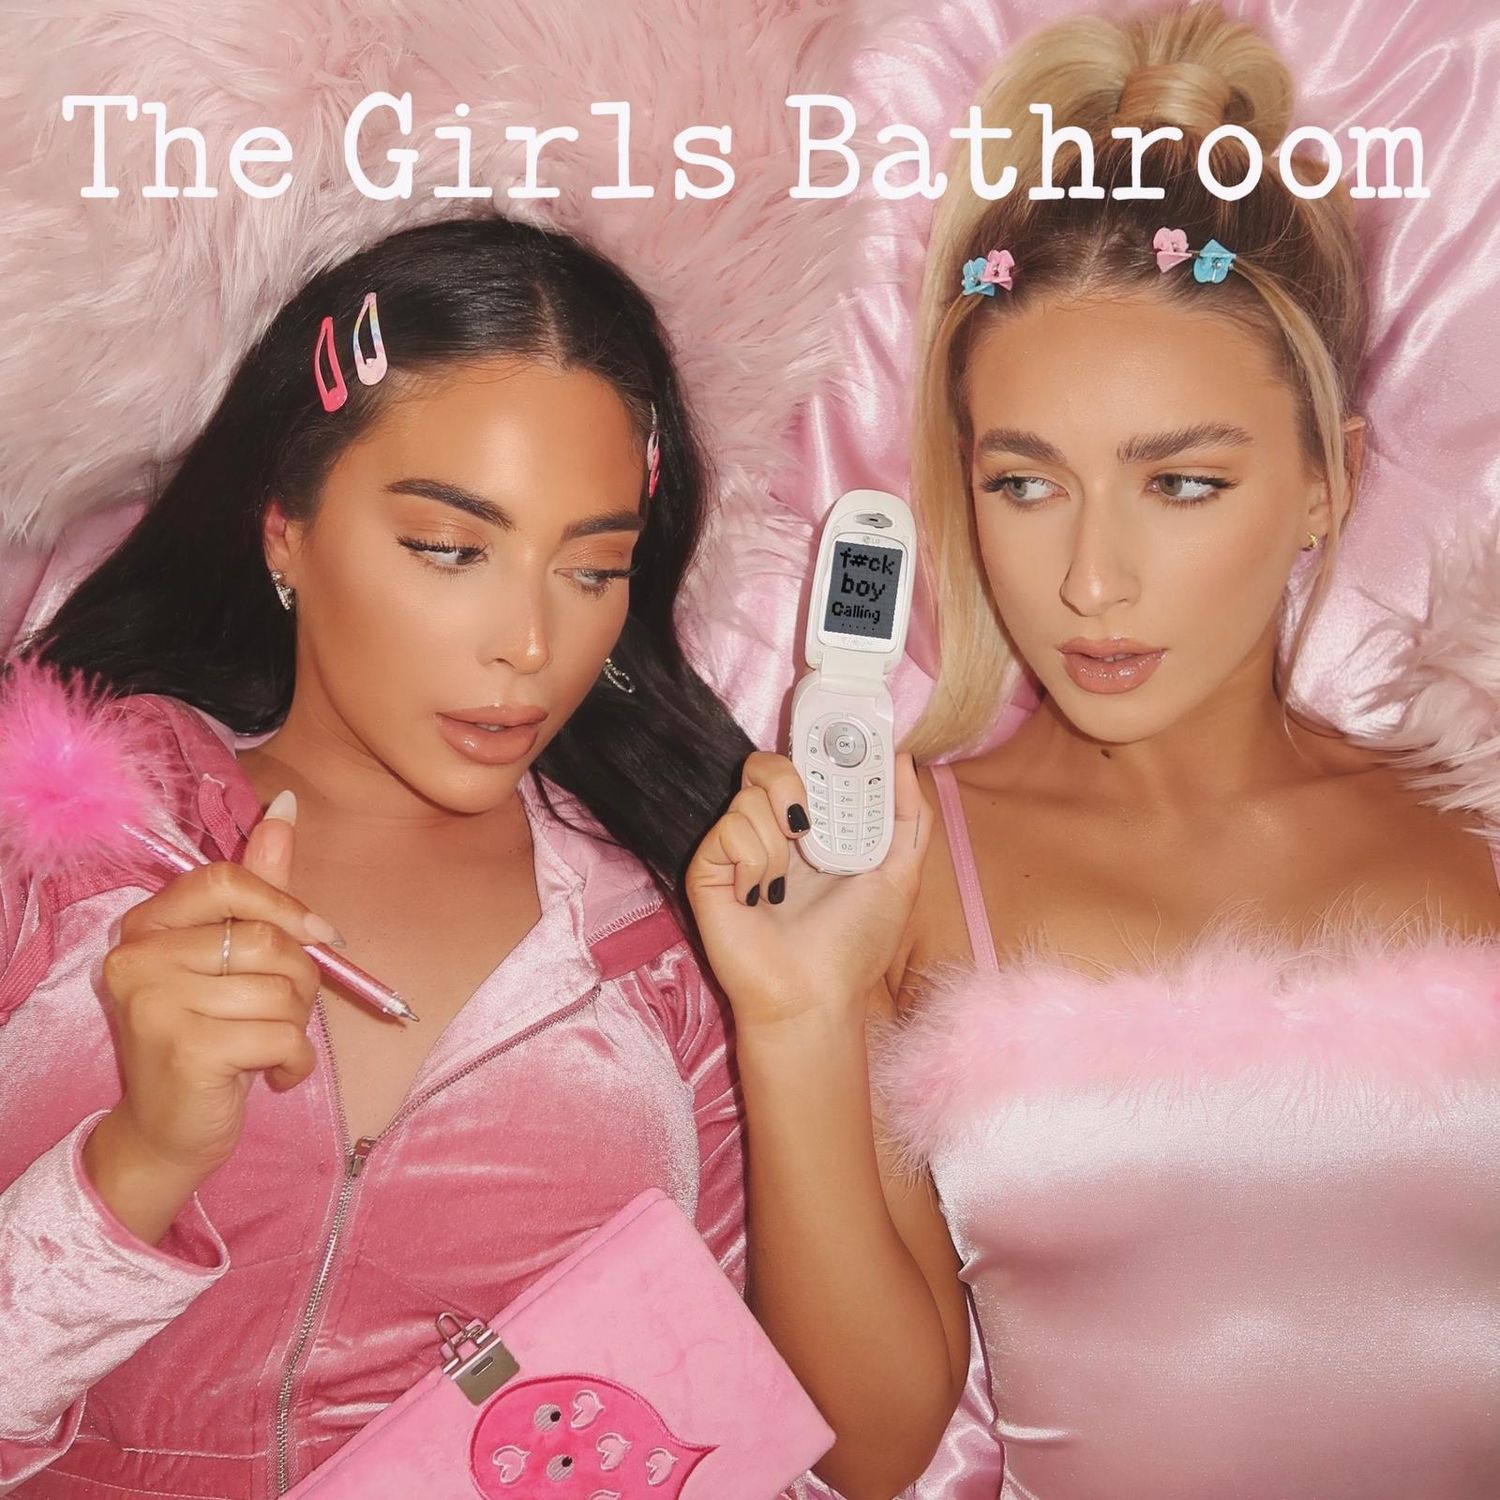 The Girls Bathroom Planet Tour at York Barbican Tickets